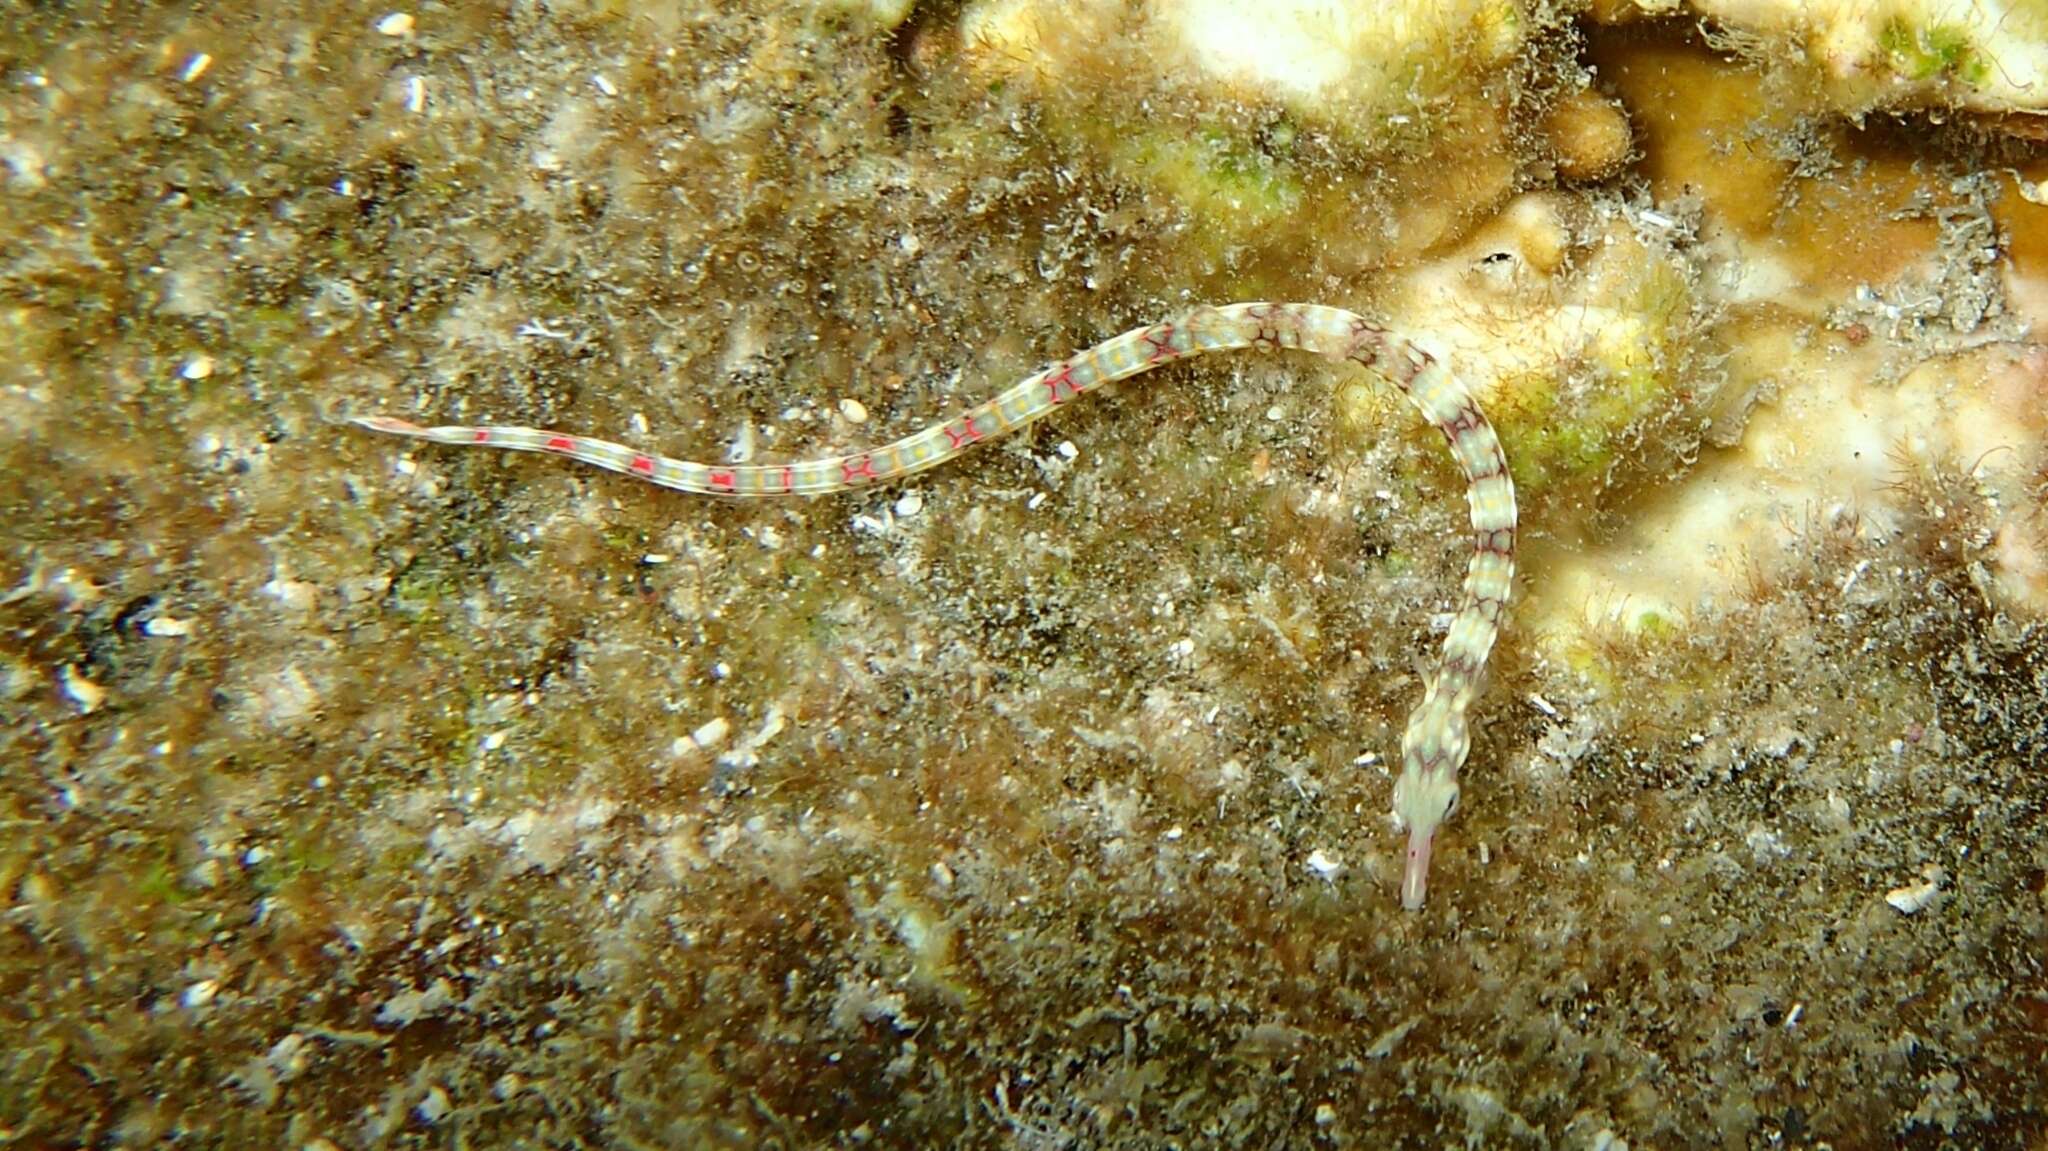 Image of Network pipefish